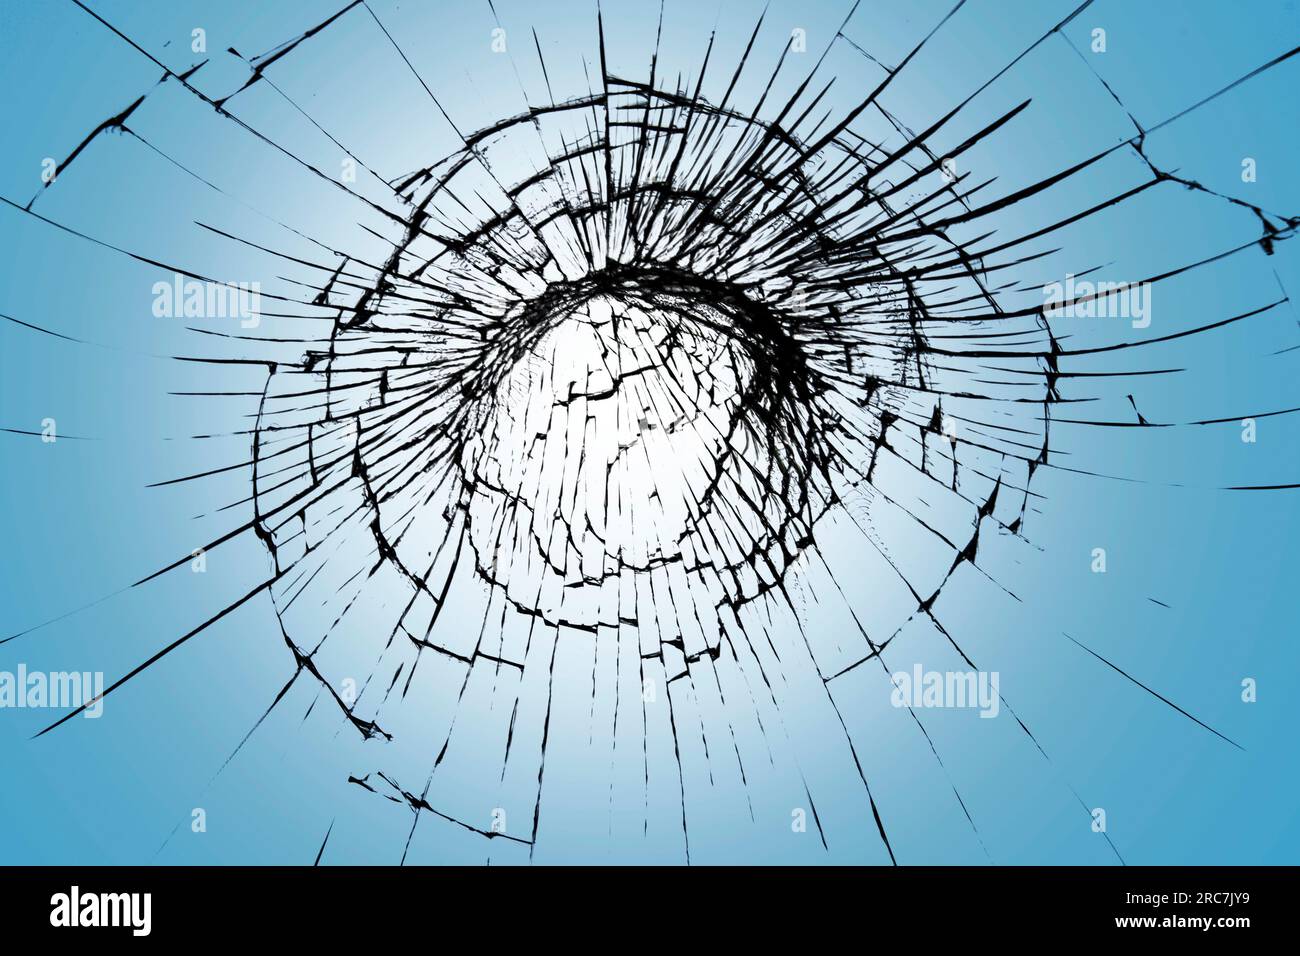 Cracked glass texture, web of broken screen. Cracked effect on blue background for design Stock Photo